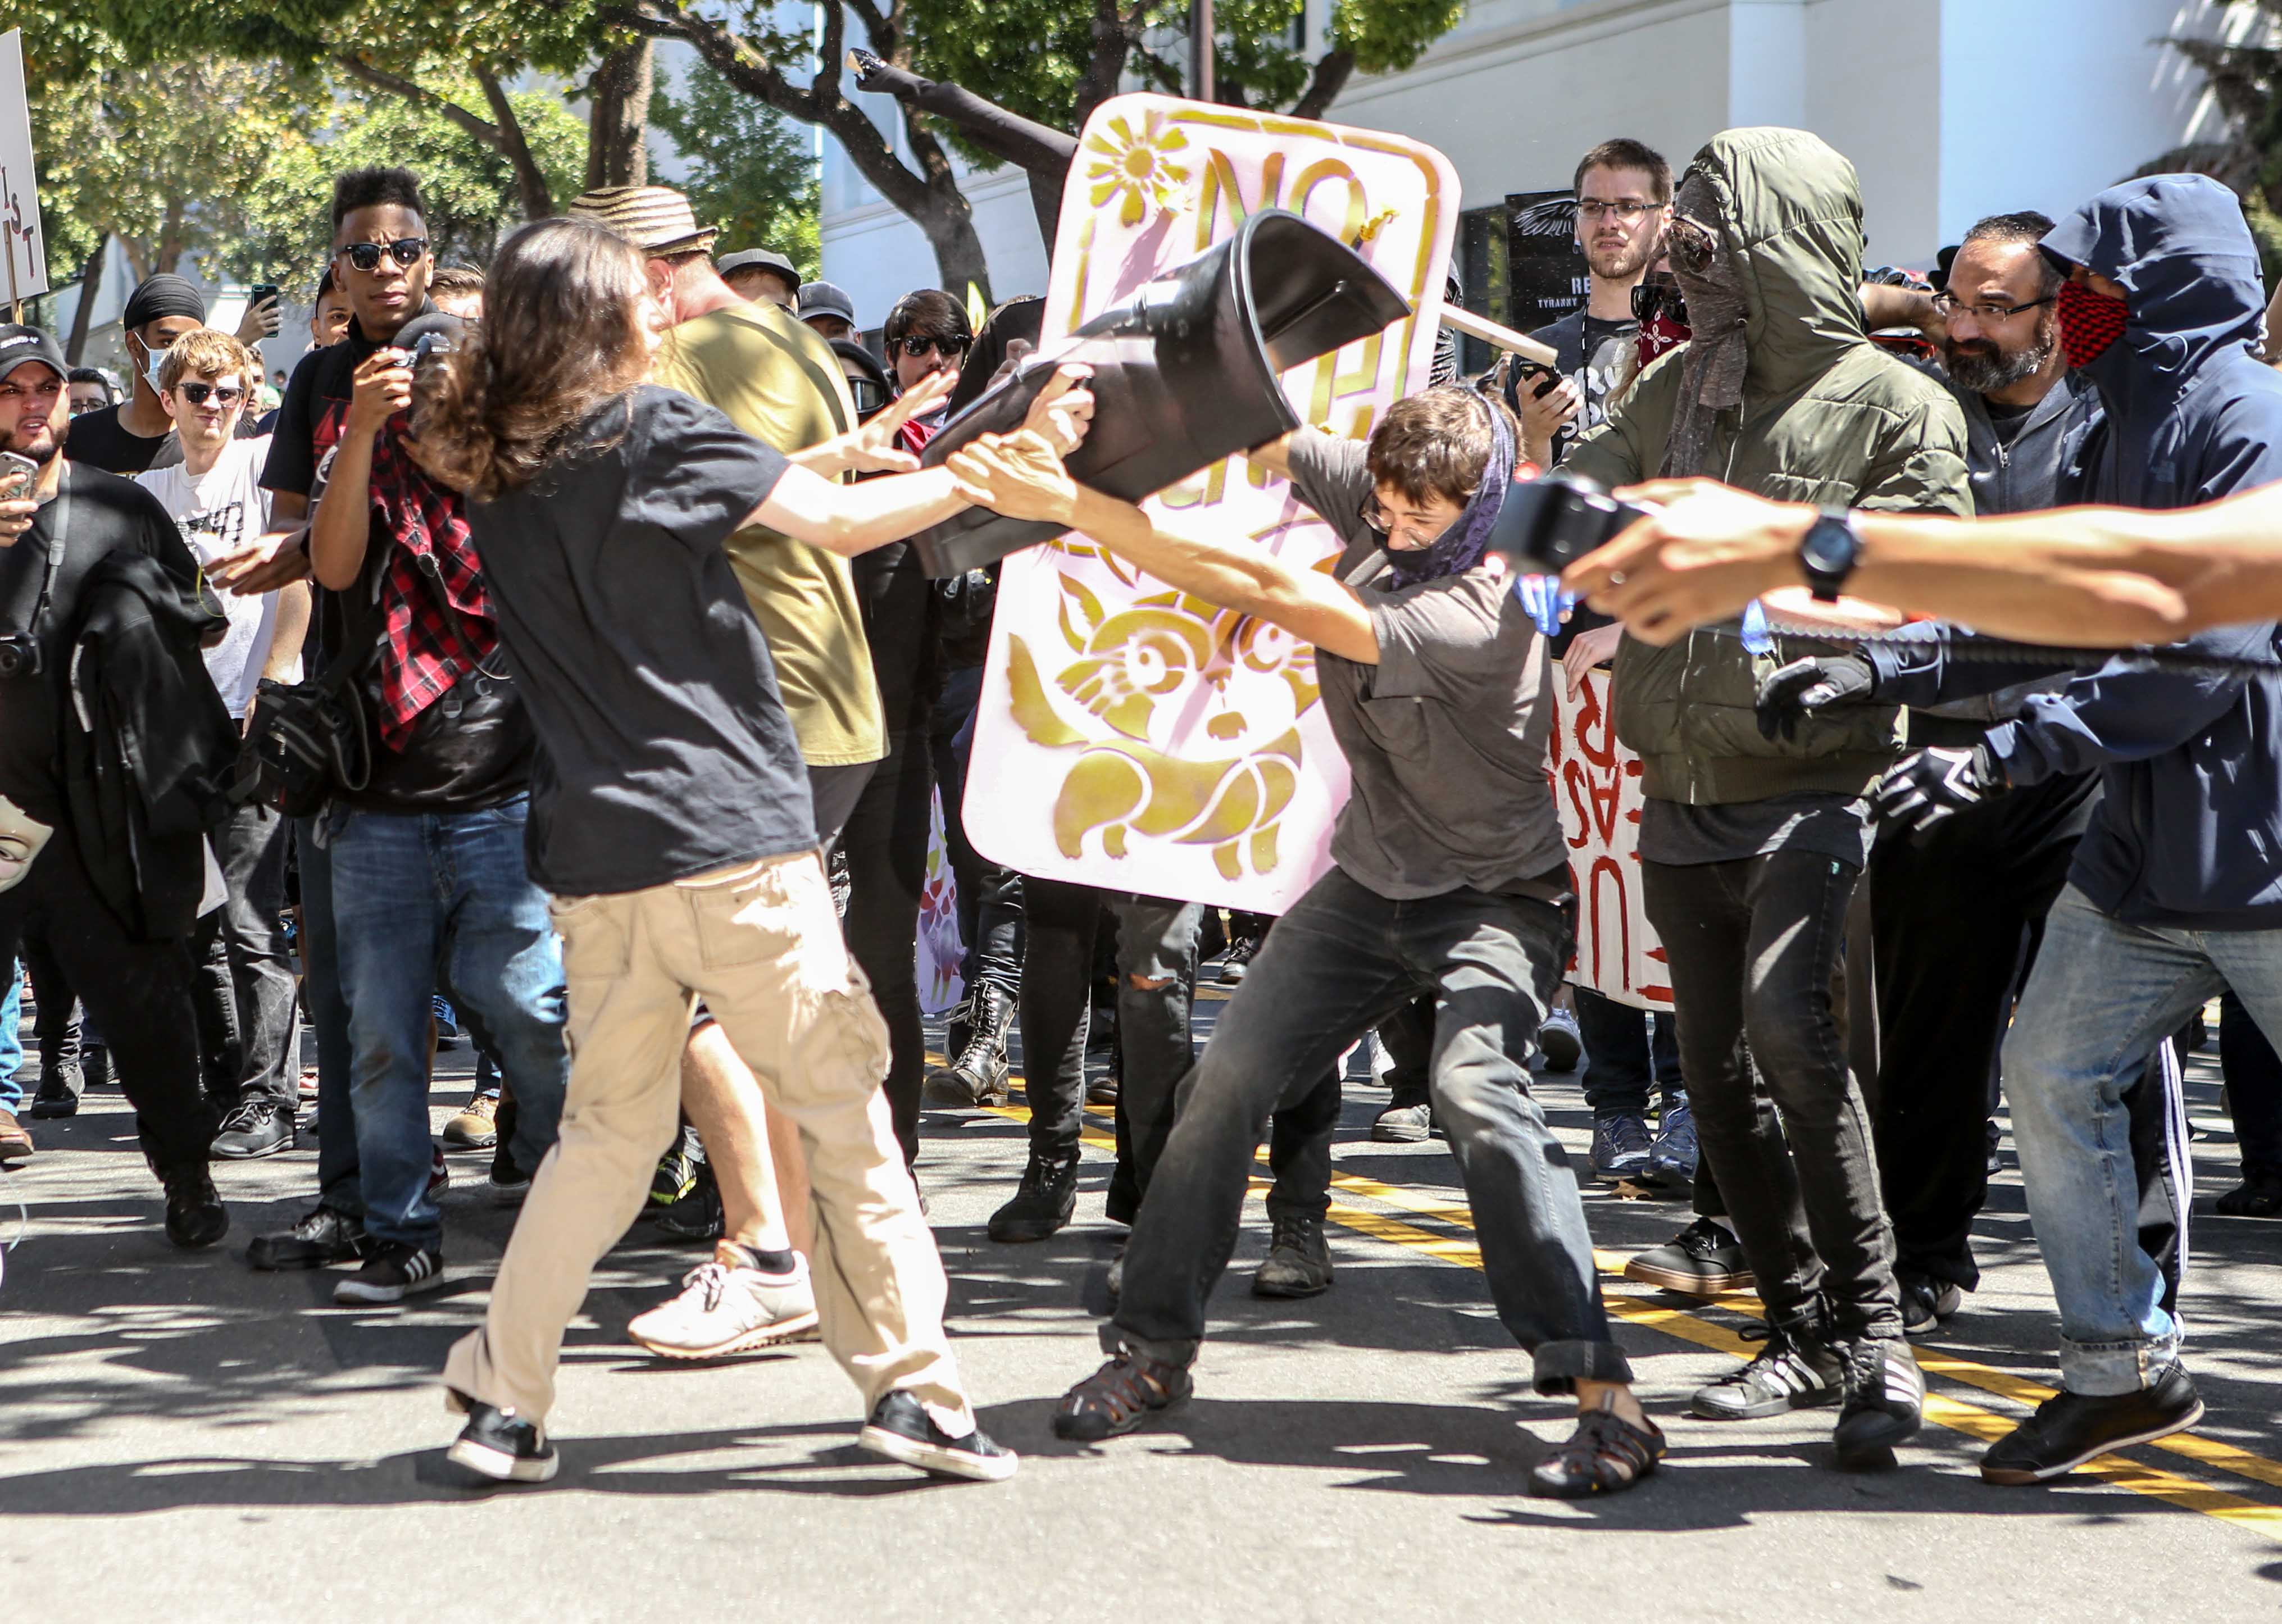 No-To-Marxism rally members and counter protesters clash on Aug. 27, 2017 at Martin Luther King Park Jr. Civic Center Park in Berkeley, California. (AMY OSBORNE—AFP/Getty Images)